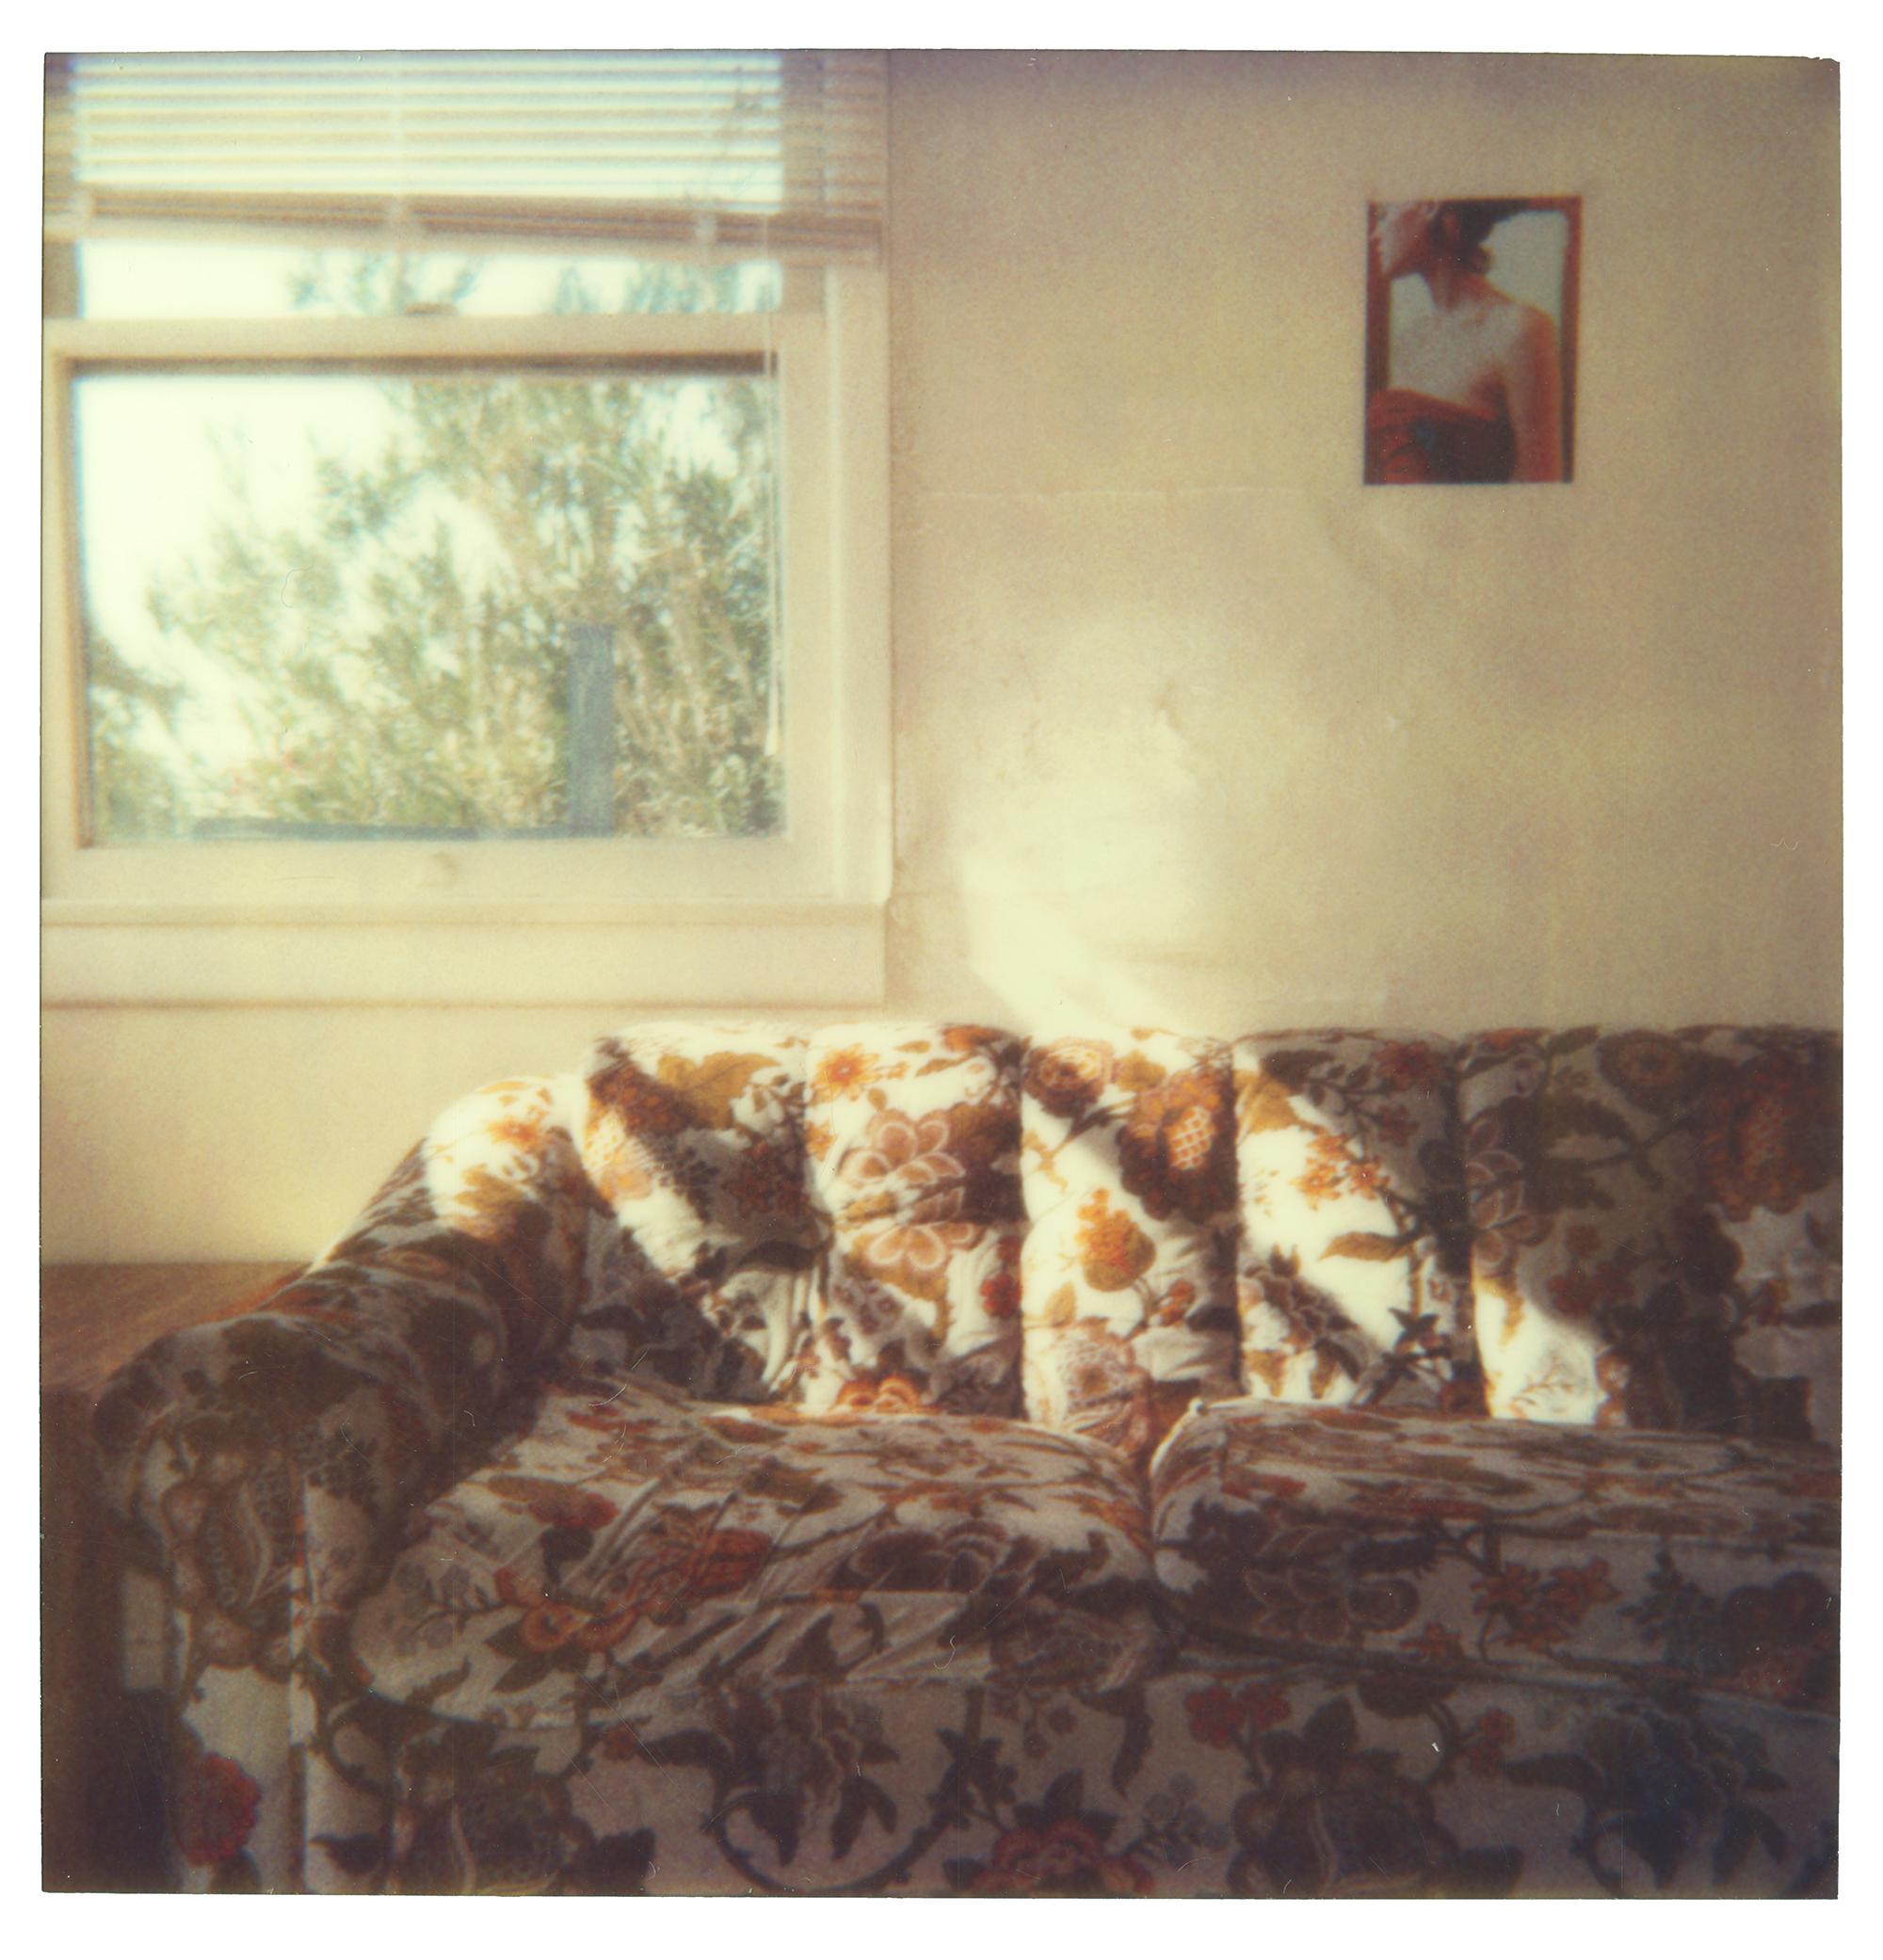 Orange Flowered Couch (29 Palms, CA) - Polaroid, Contemporary